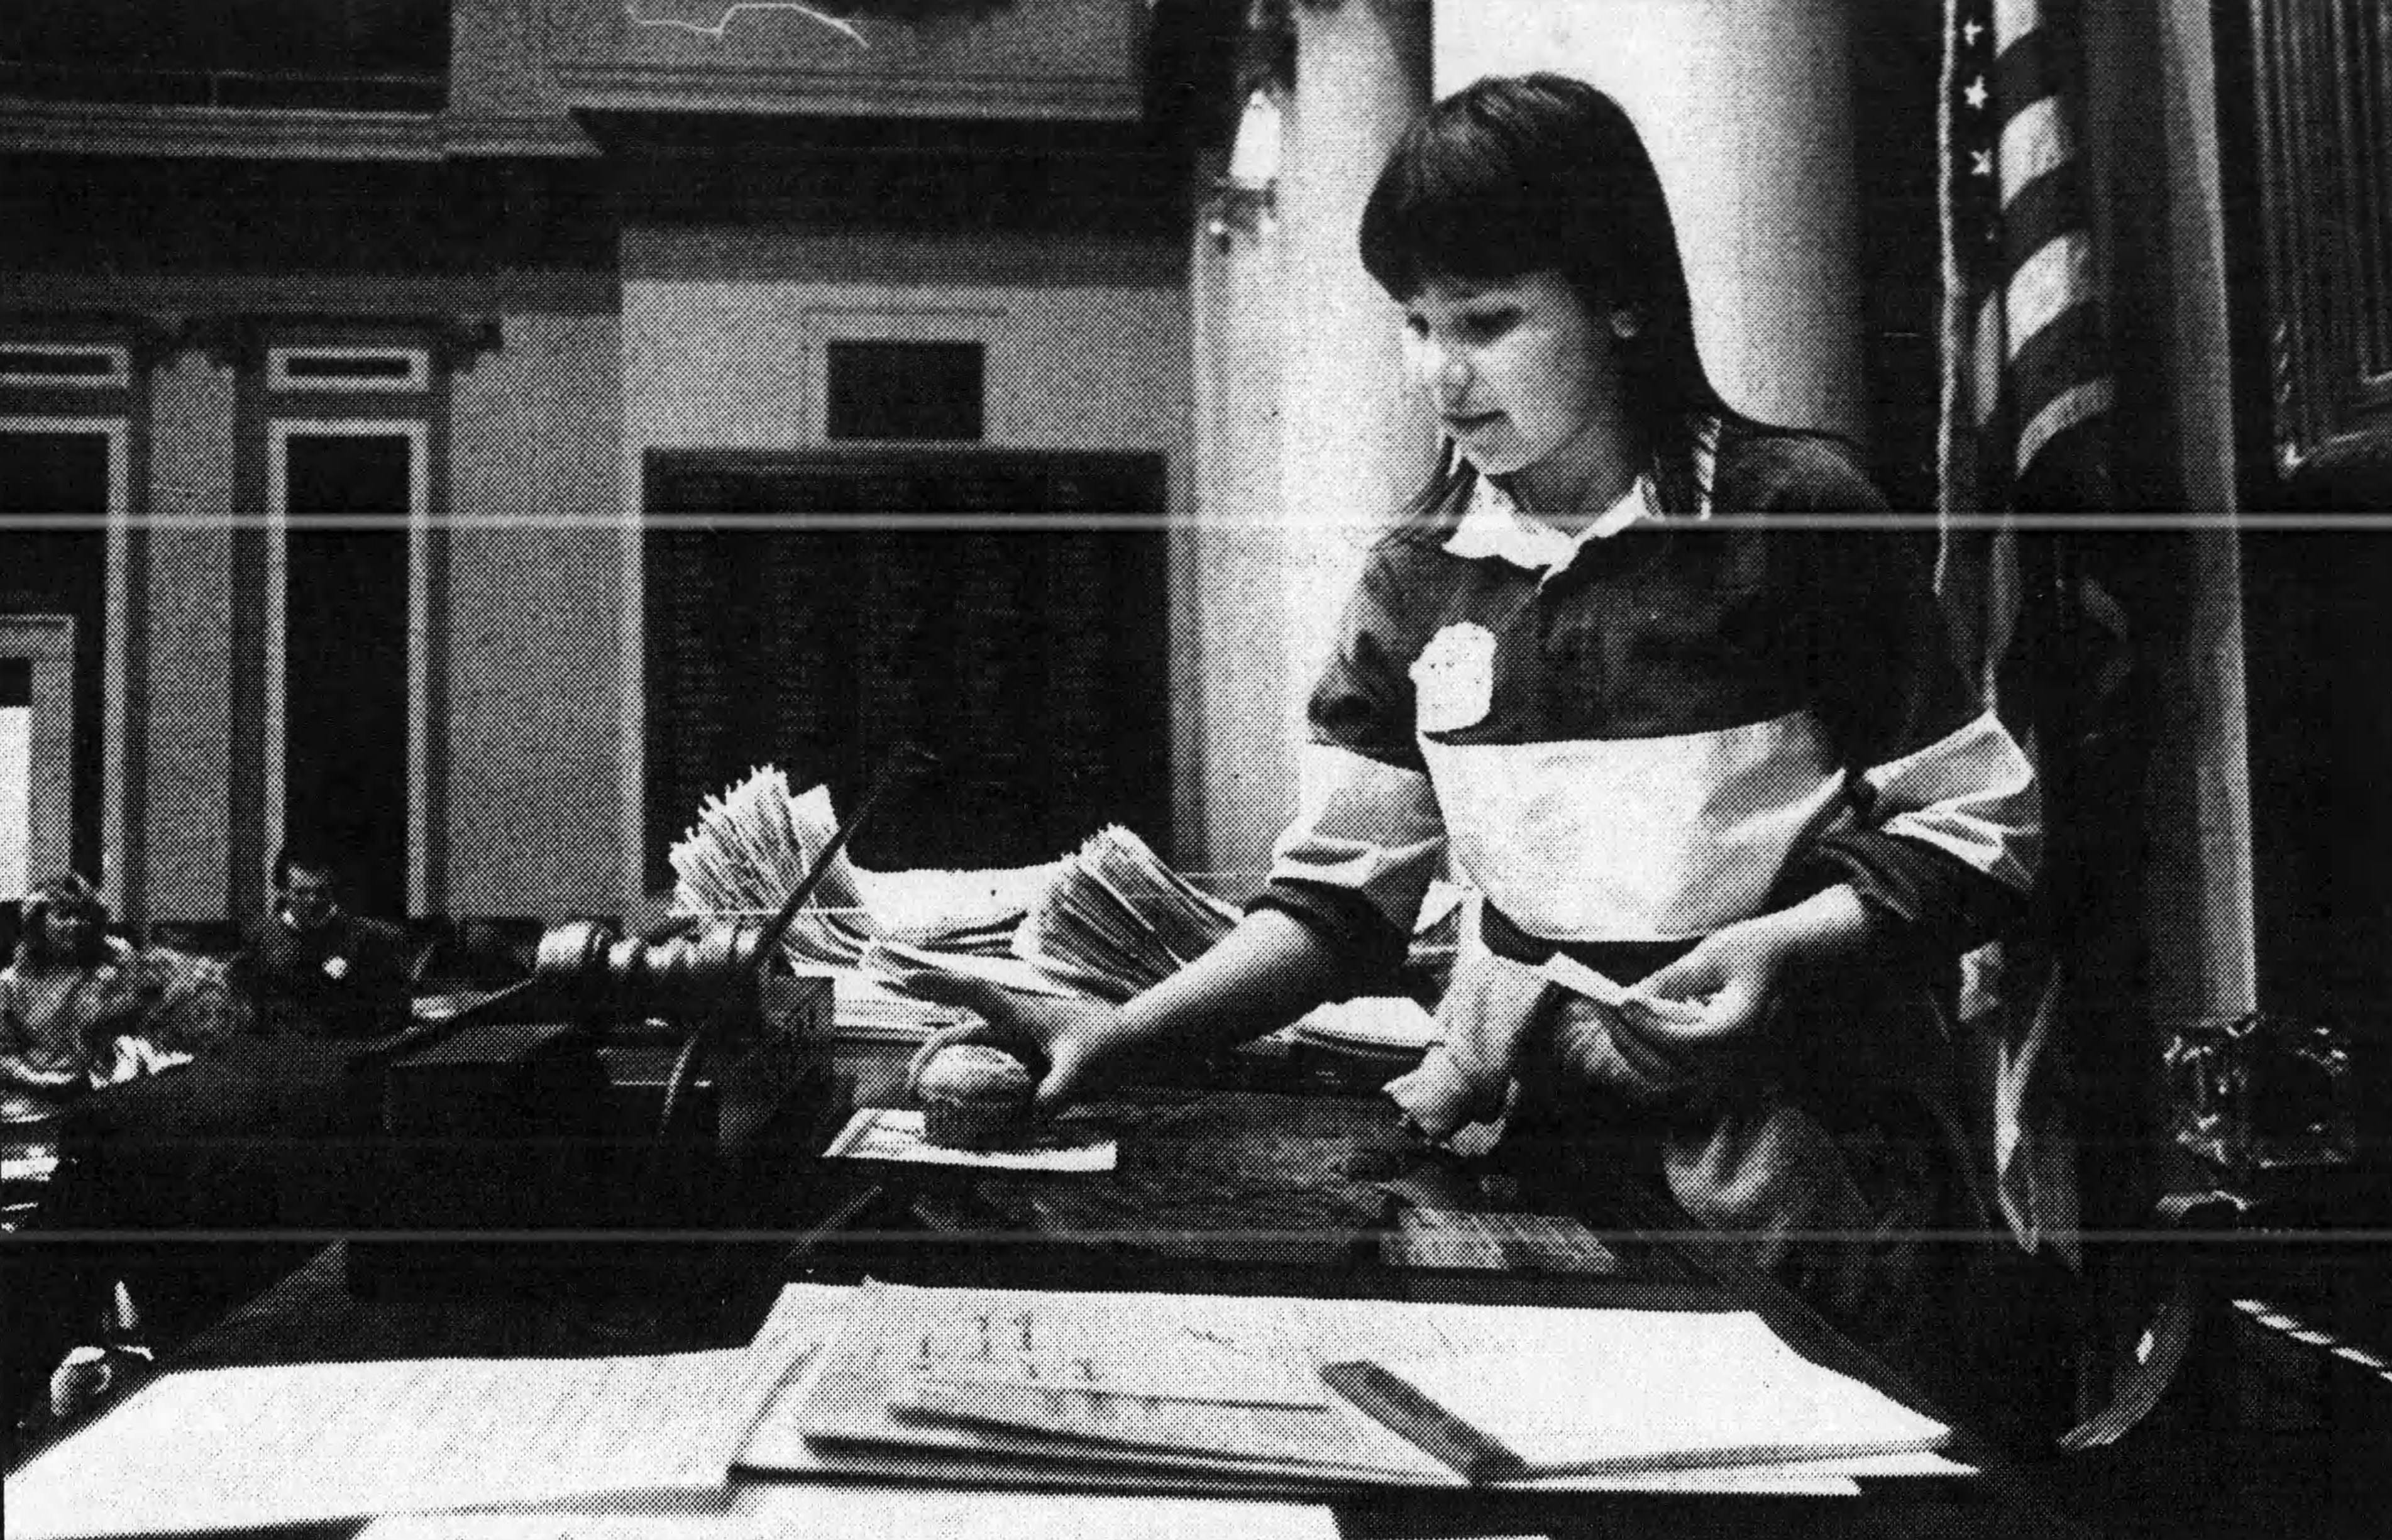 South Terrace Elementary student Jossette Martin placed a muffin on the desk of Speaker of the House Robert Vanasek in 1988. (This image is from a newspaper scan. The original version could not be located.)